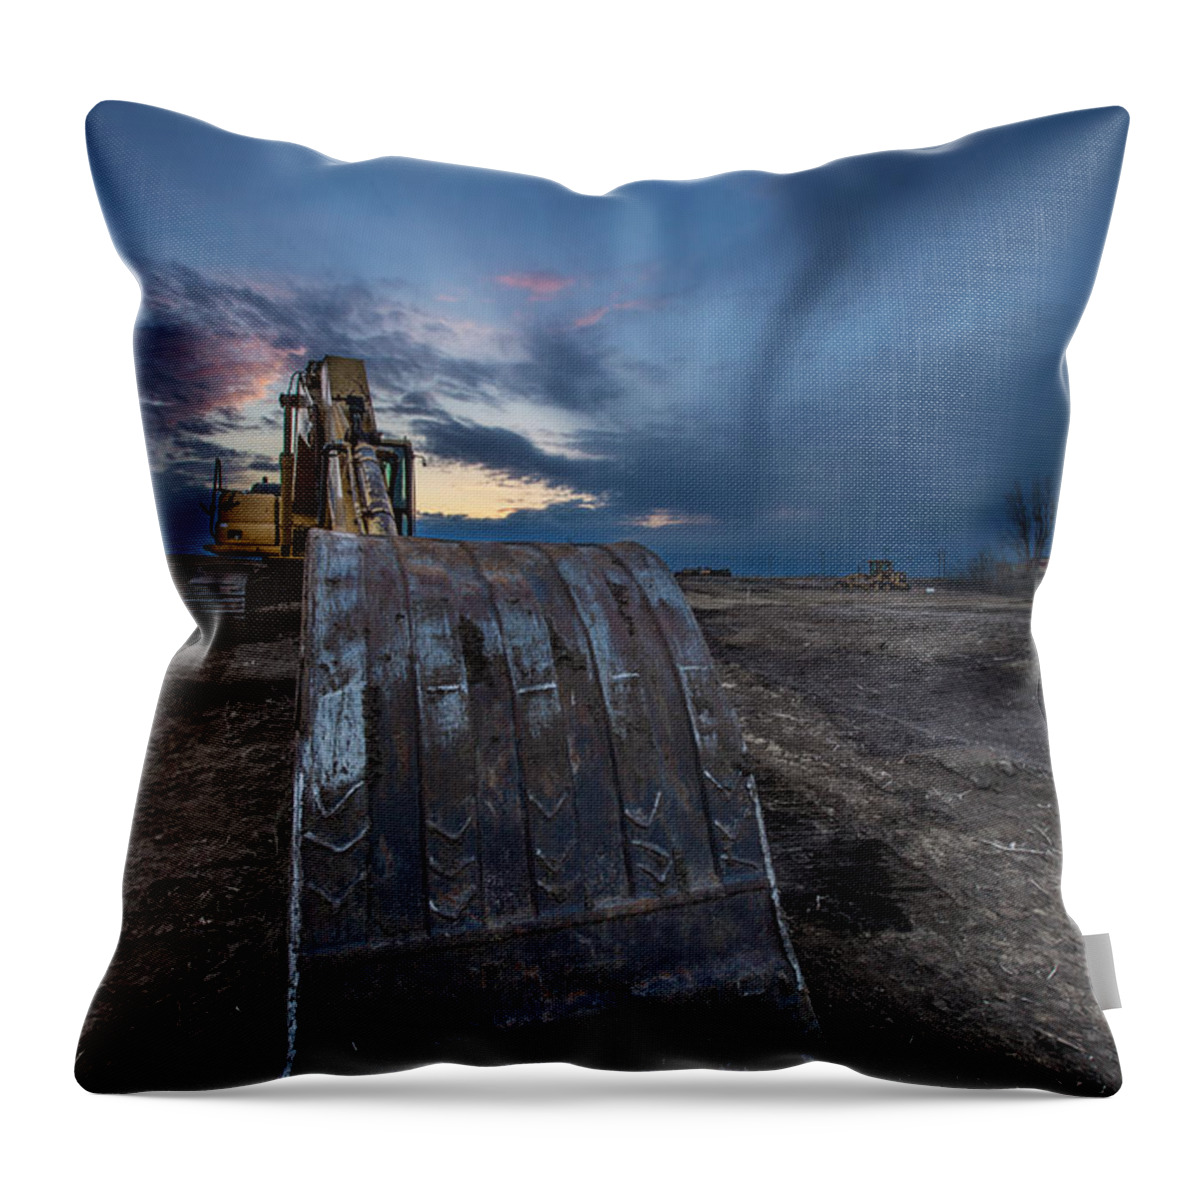 Www.facebook.com/homegroenphotography Throw Pillow featuring the photograph Excavator 2 by Aaron J Groen